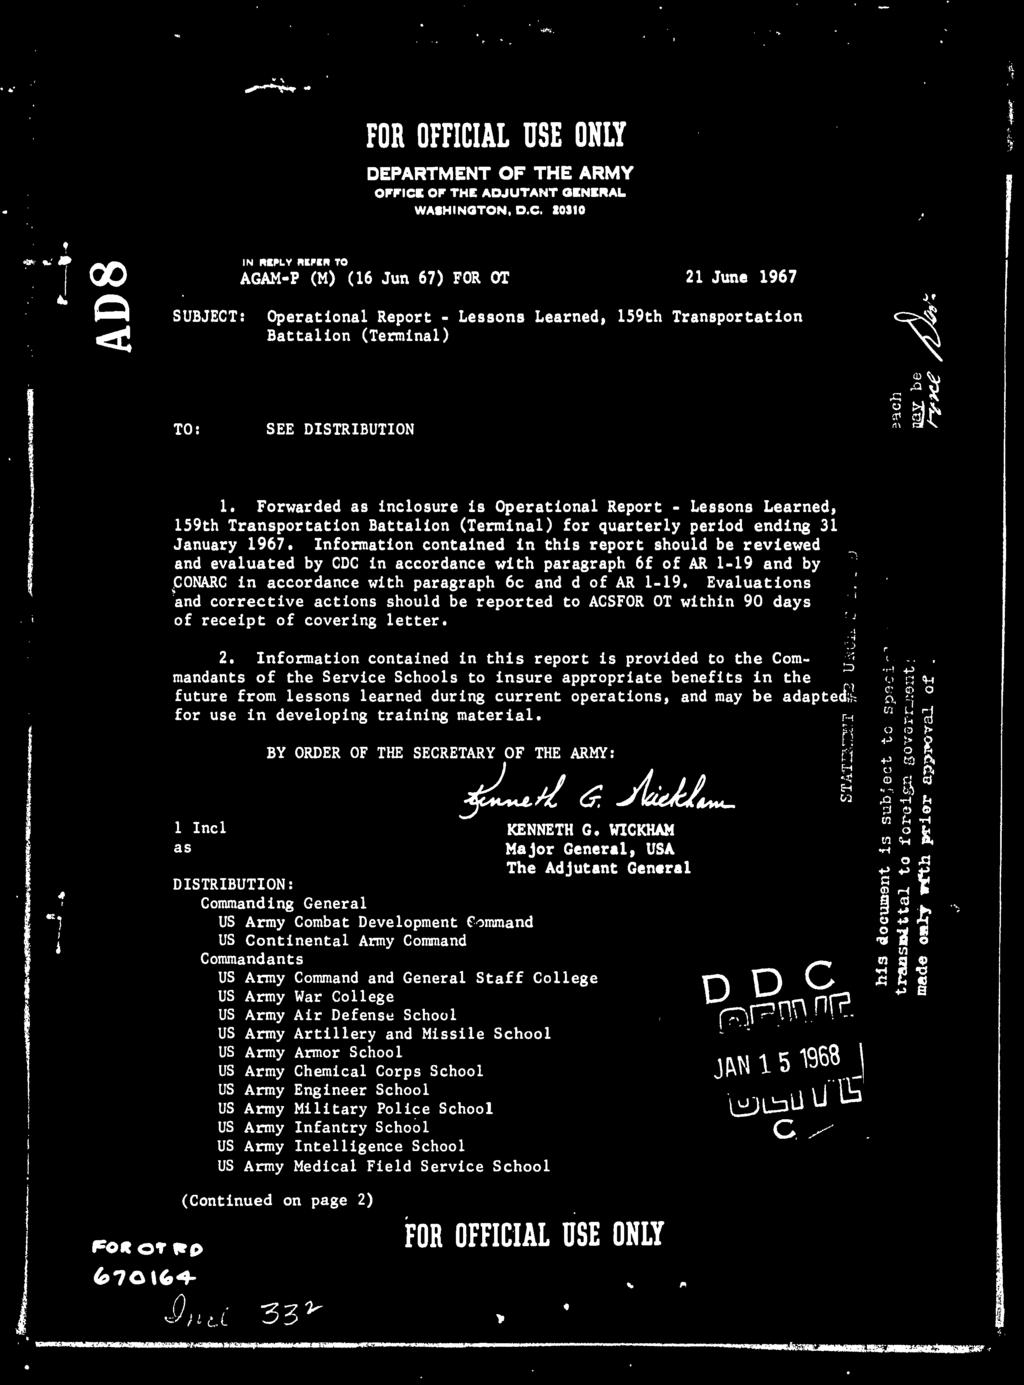 FOR OFFICIAL USE ONLY DEPARTMENT OF THE ARMY OFFICE OF THE ADJUTANT GENERAL WASHINGTON, D.C. IOSIO T oo SUBJECT: IN RMLY NtPIR TO AGAM-P (M) (16 Jun 67) FOR OT 21 June 1967 Operational Report - Lessons Learned, 159th Transportation Battalion (Terminal) TO: SEE DISTRIBUTION 1.